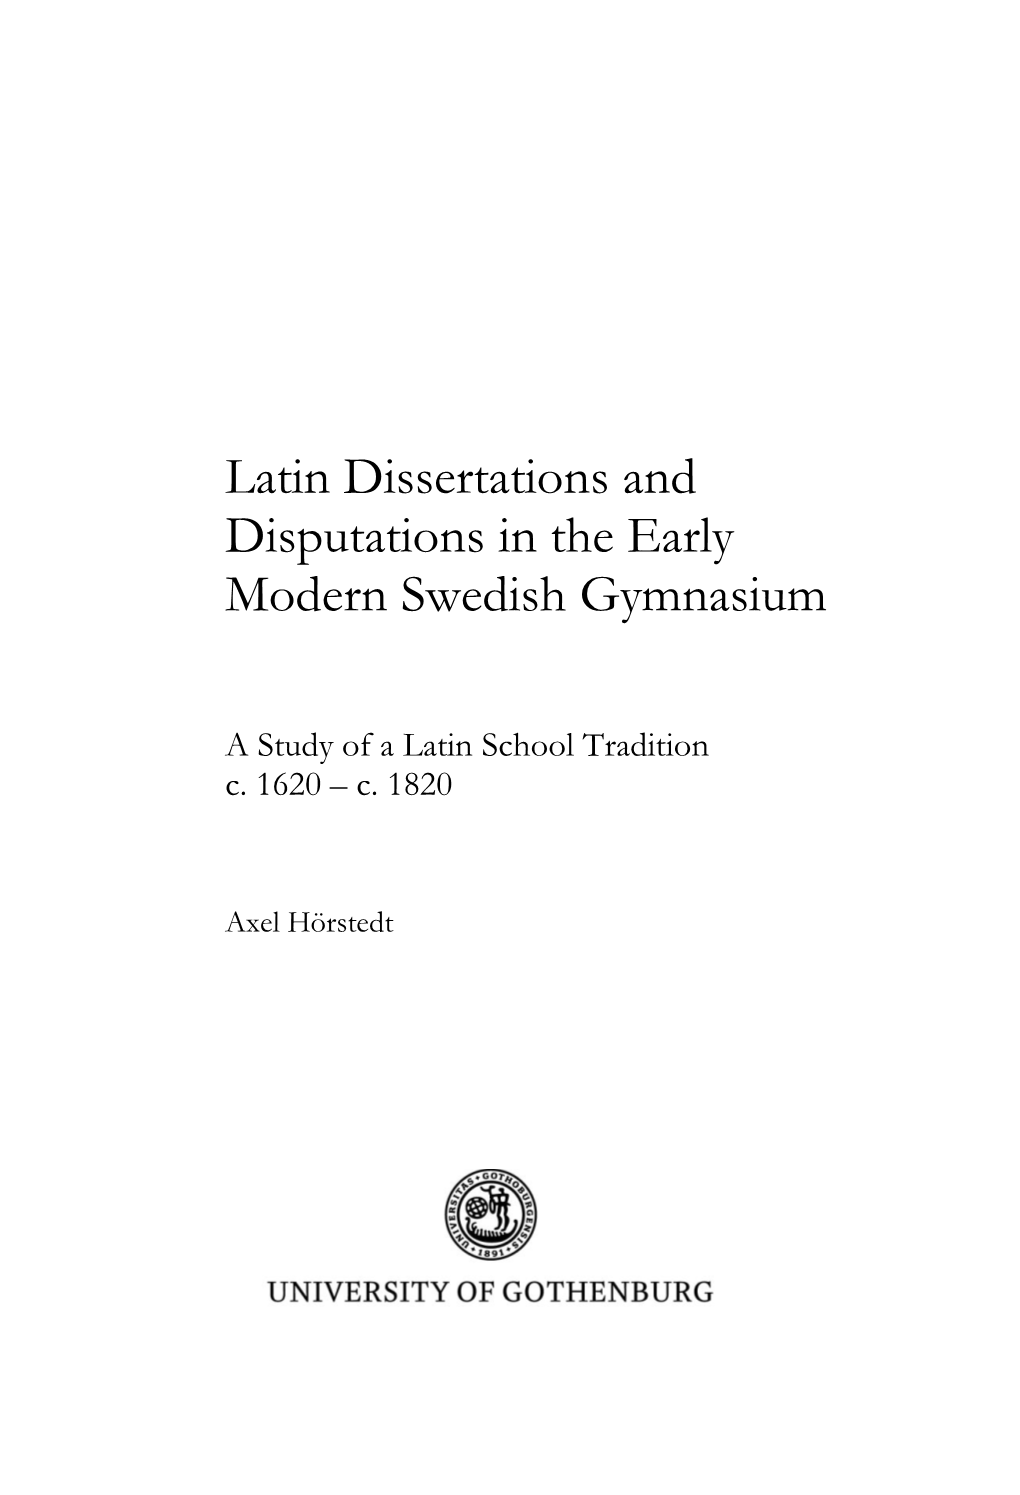 Latin Dissertations and Disputations in the Early Modern Swedish Gymnasium